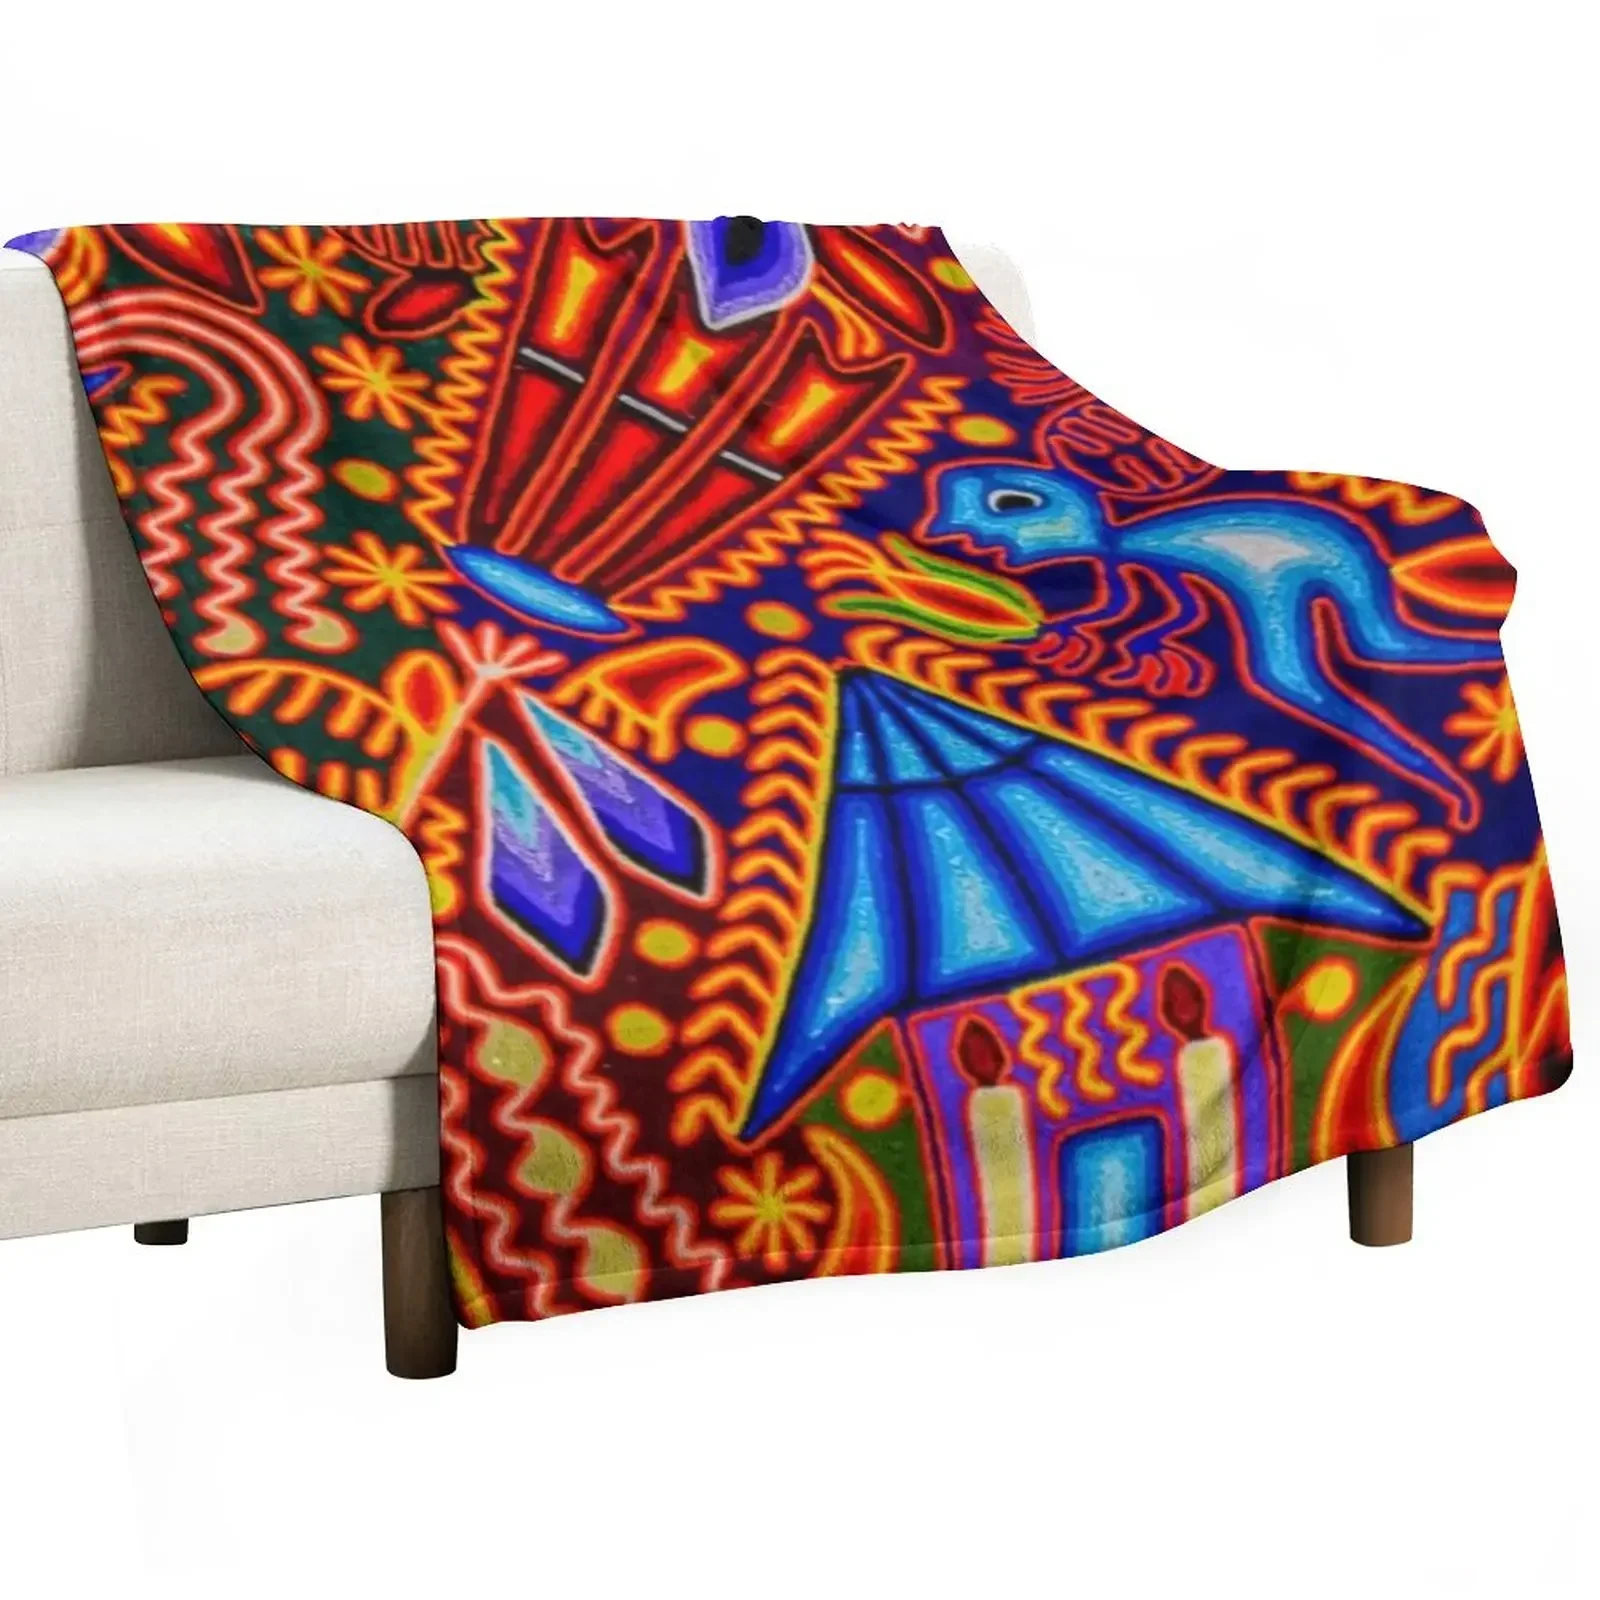 

Huichol textile Throw Blanket Hairy Comforter Loose Flannels Blankets